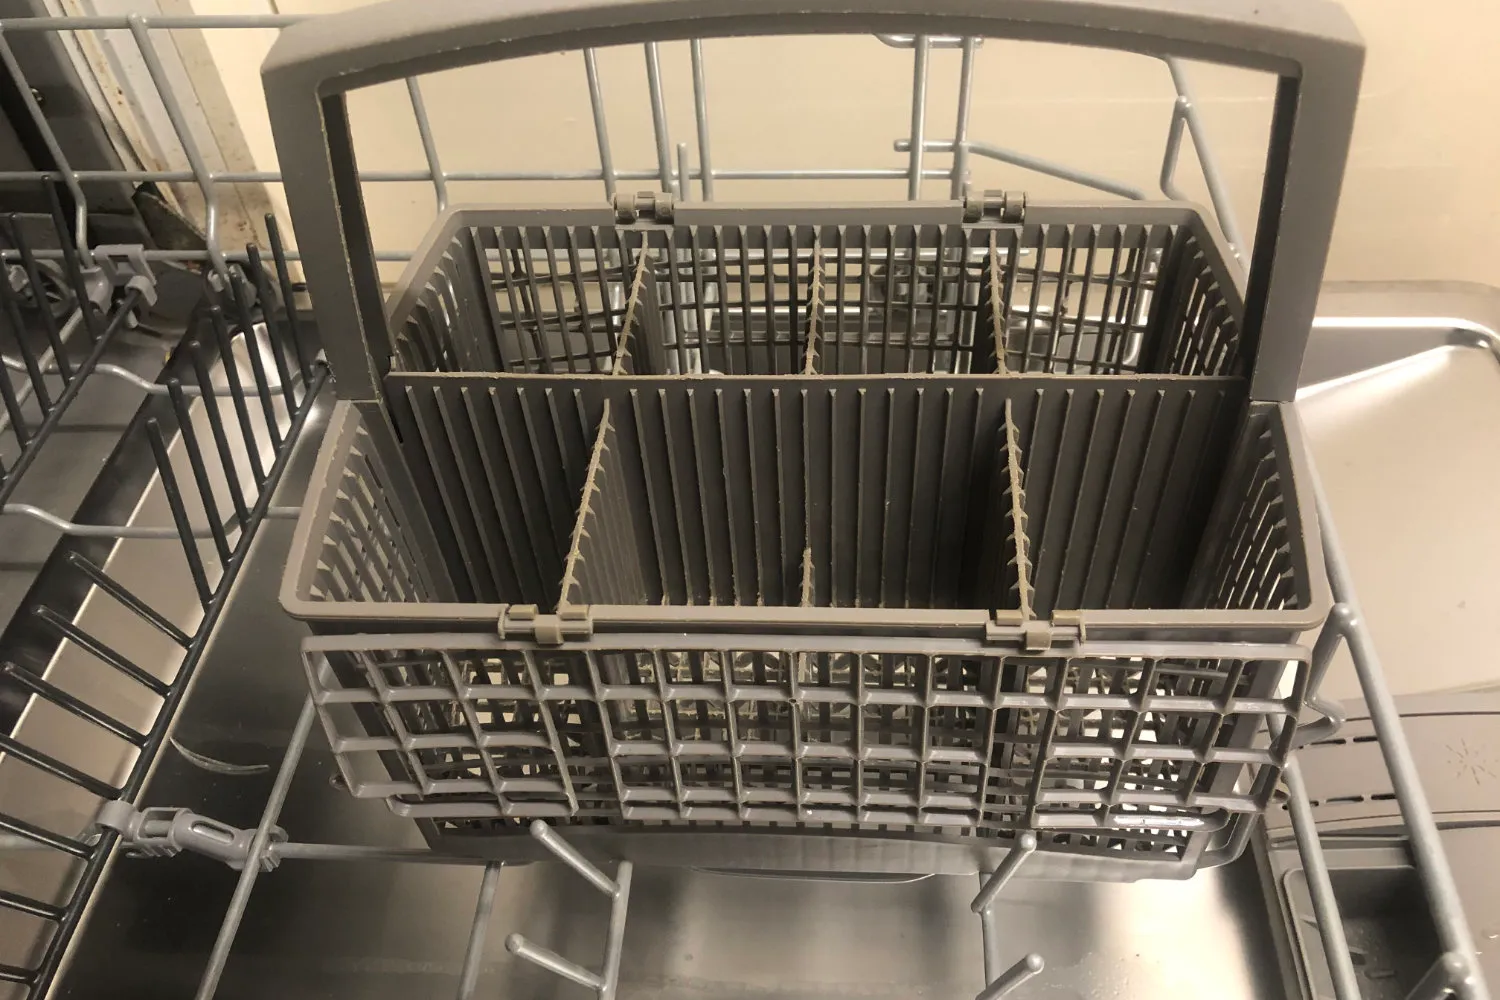 How to Clean a Dishwasher Basket with Washing Soda Crystals